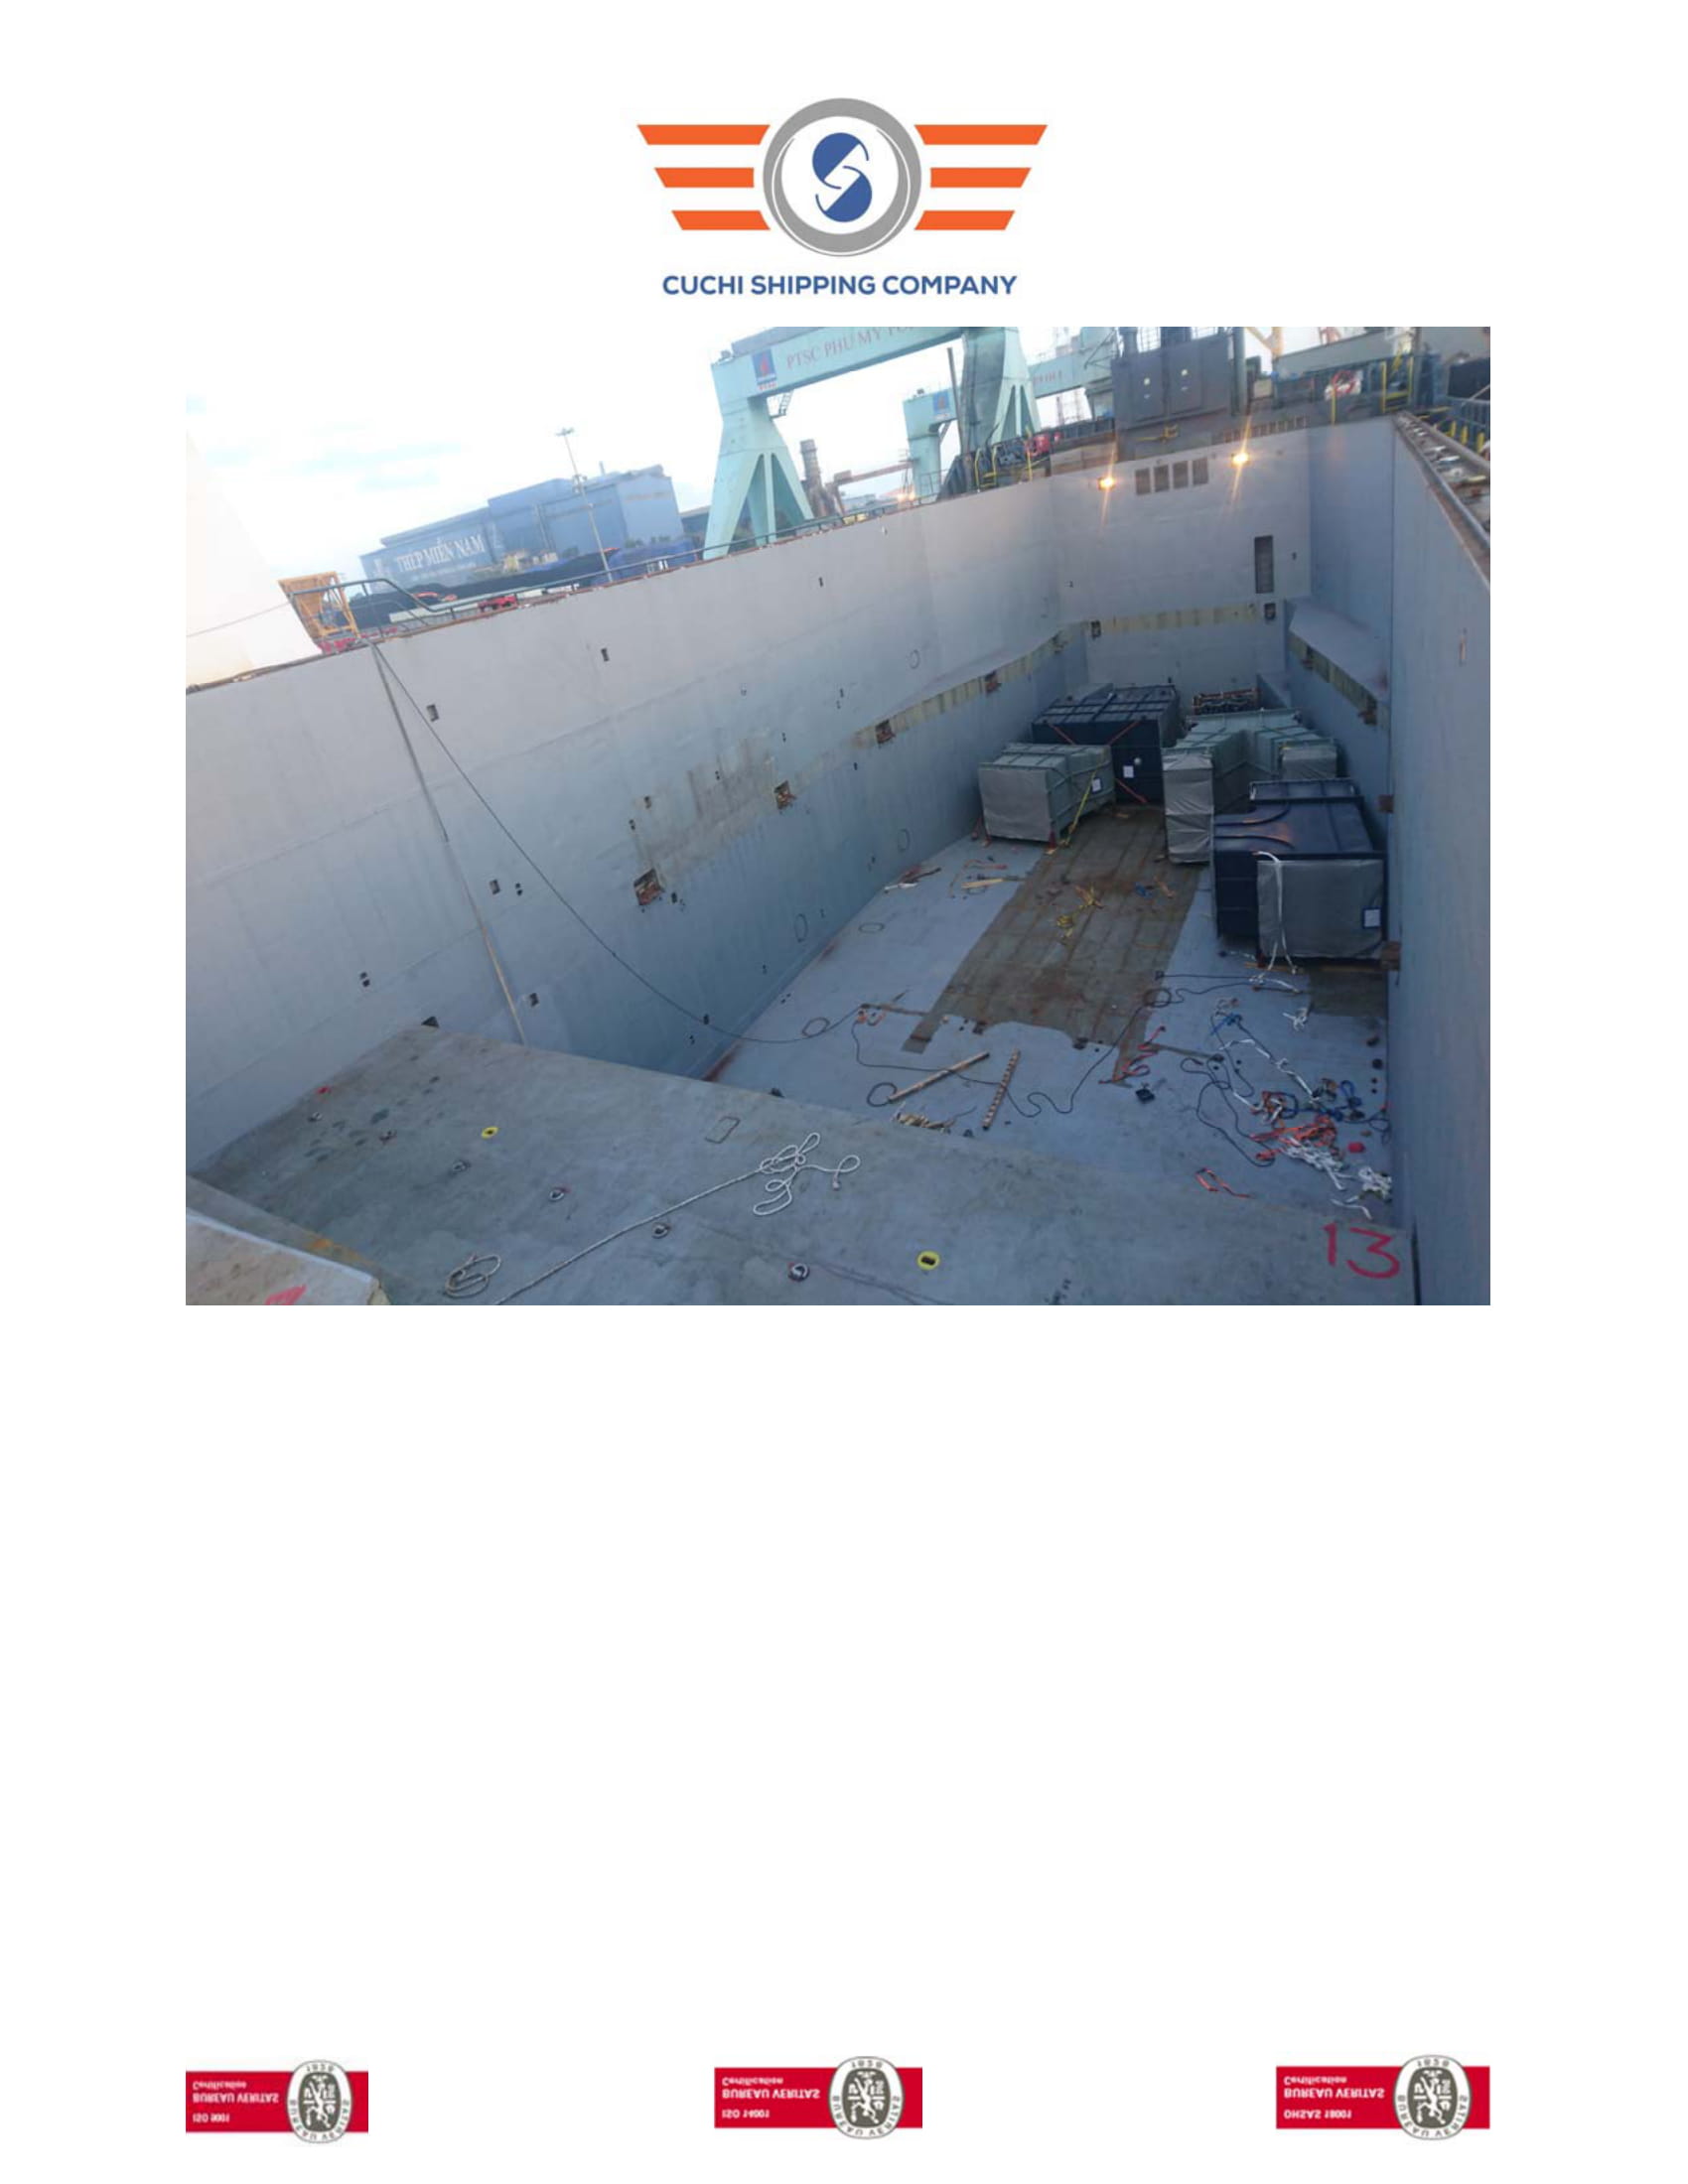 MAY-2019-DUCTING-PROJECT-FOB-TRANSPORT-1.jpg